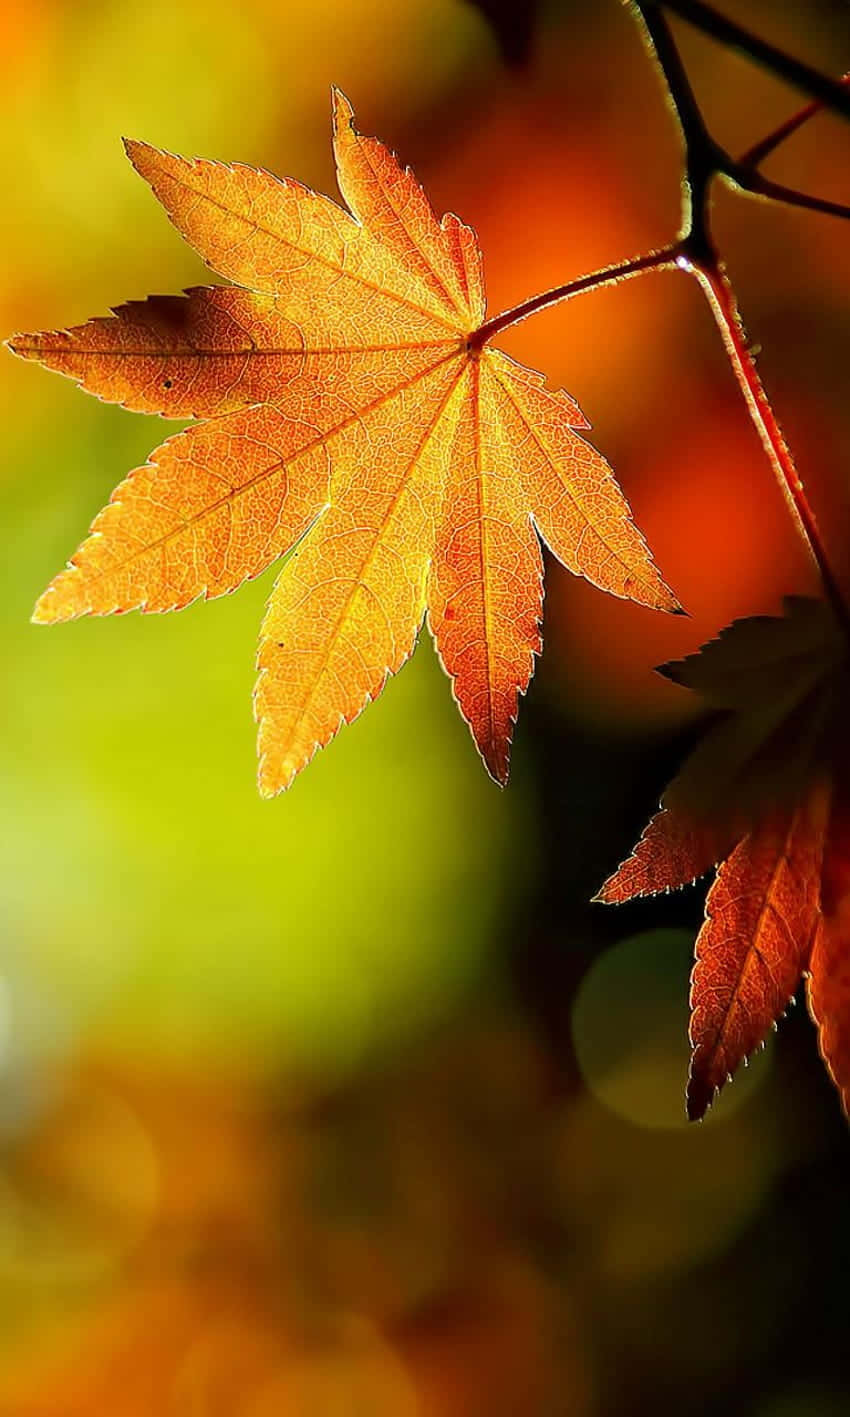 Capture the beauty of Fall with the Autumn Leaves Phone Wallpaper